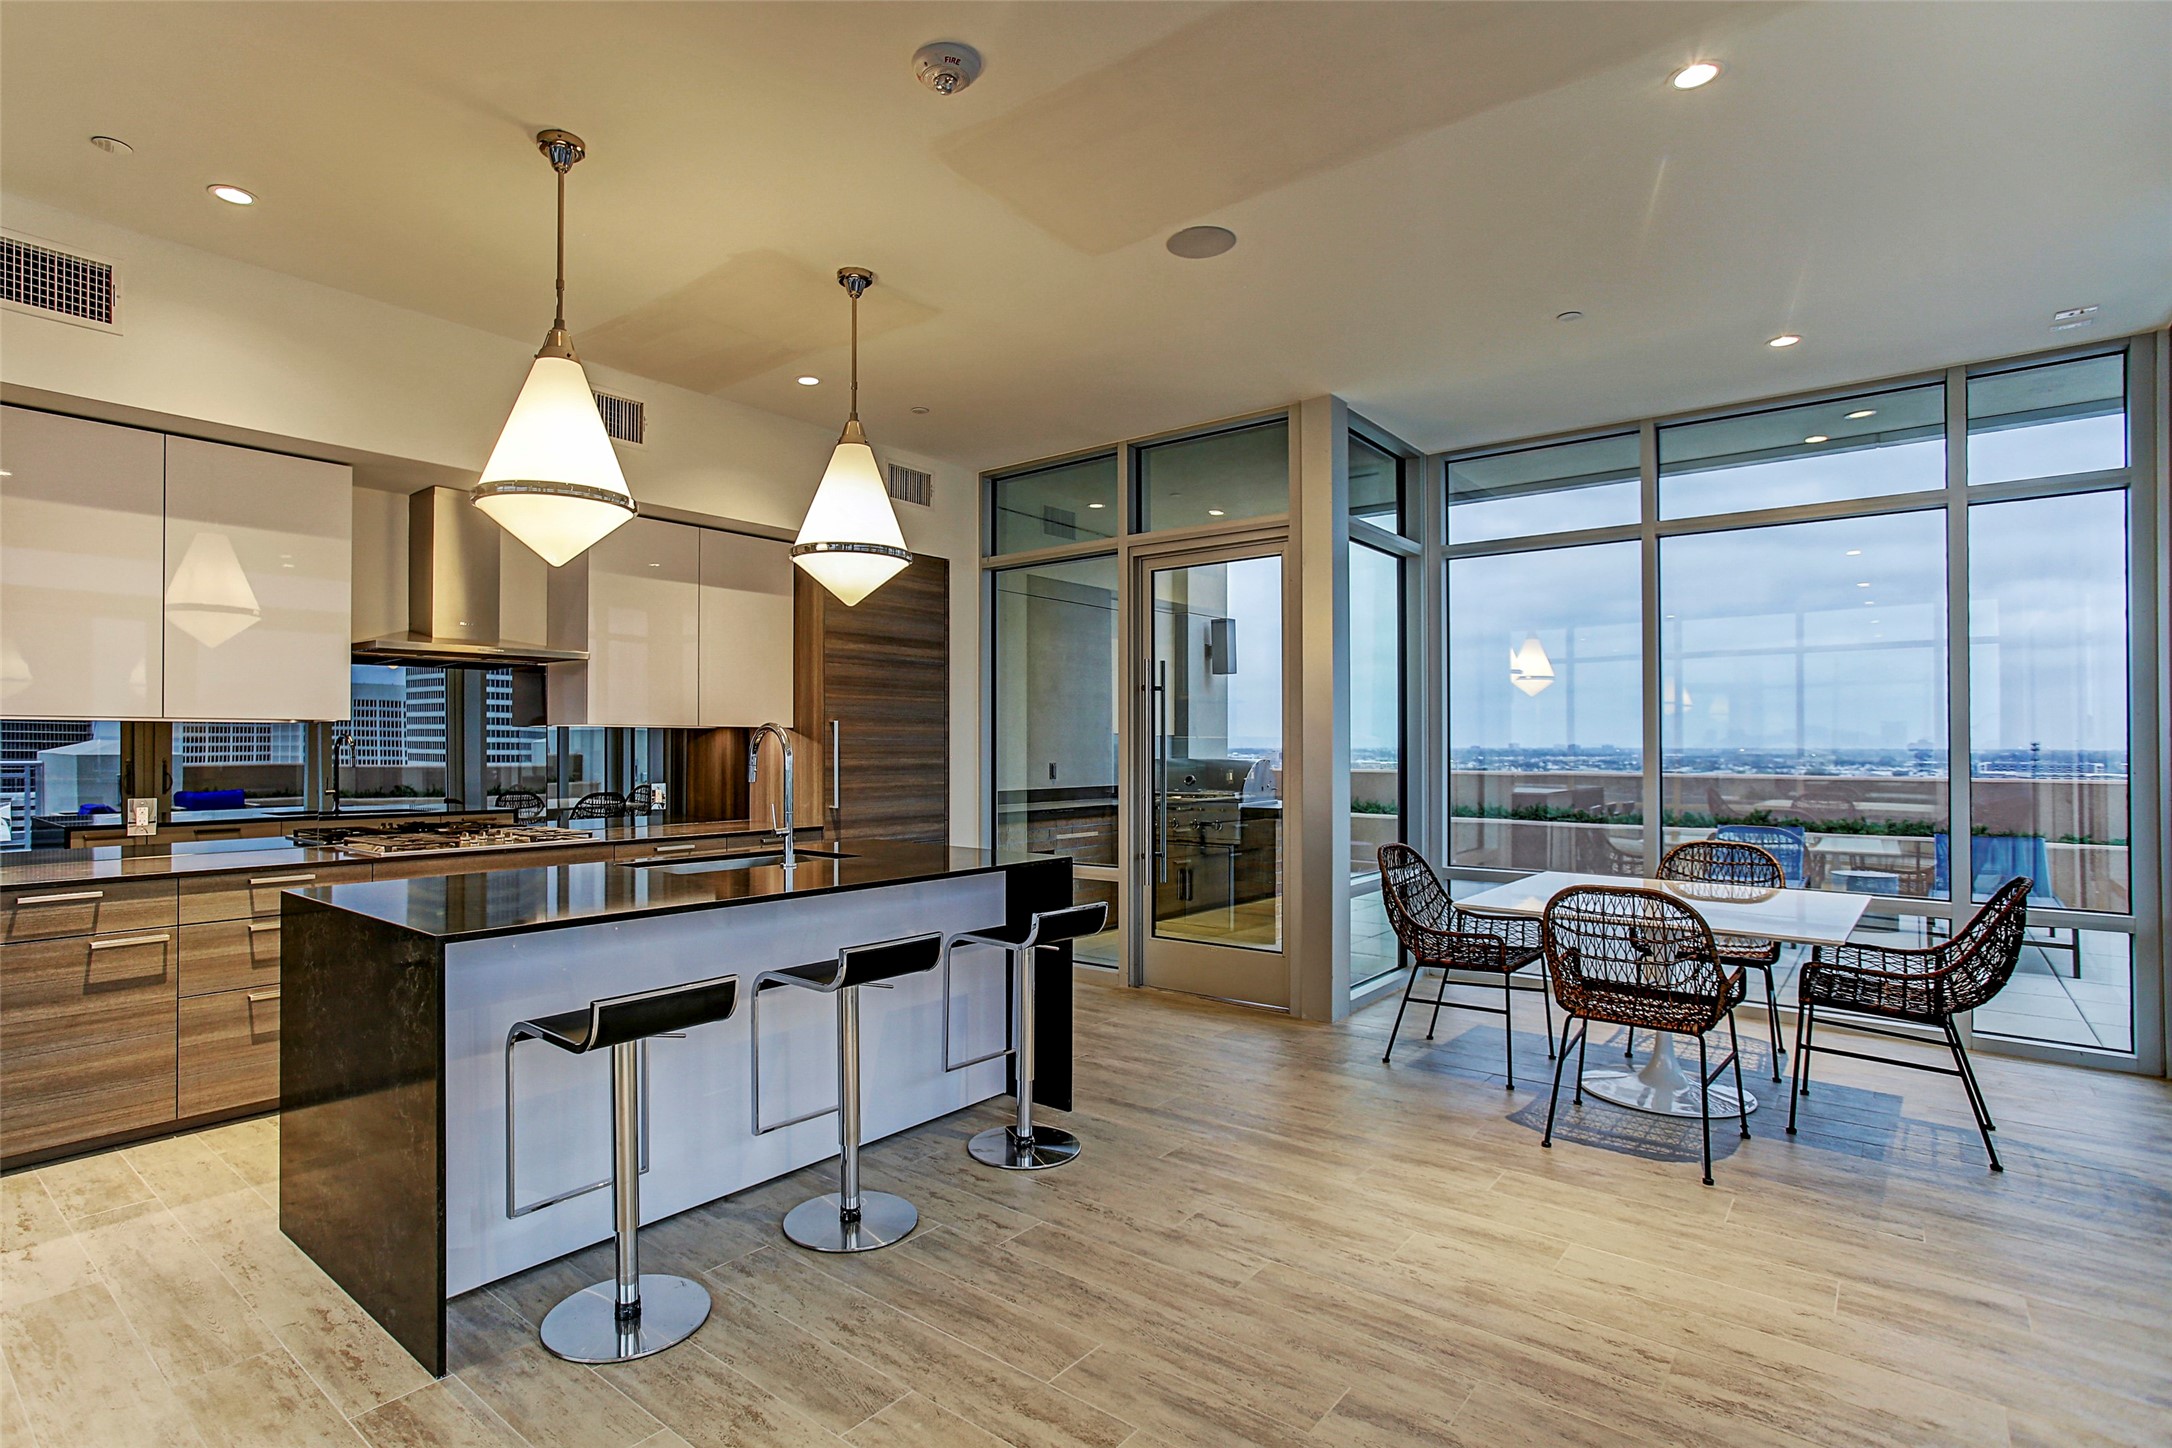 Located atop the building is this terrific party room. A complete kitchen opens to the terrace with breath taking views.